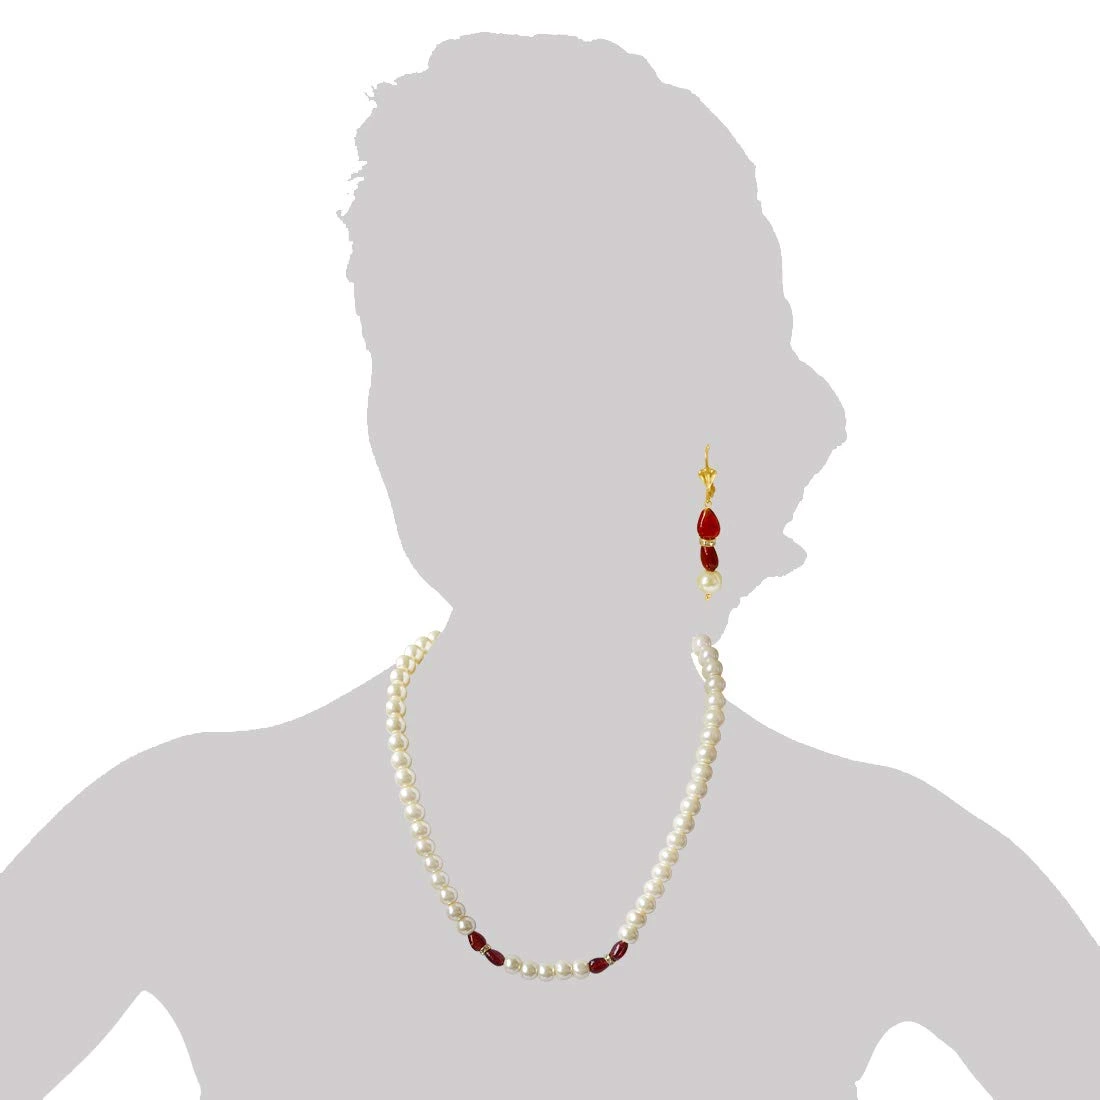 Single Line White Shell Pearl, Oval Shaped Red Stone & Stone Ring Necklace Earring Set (PS475)